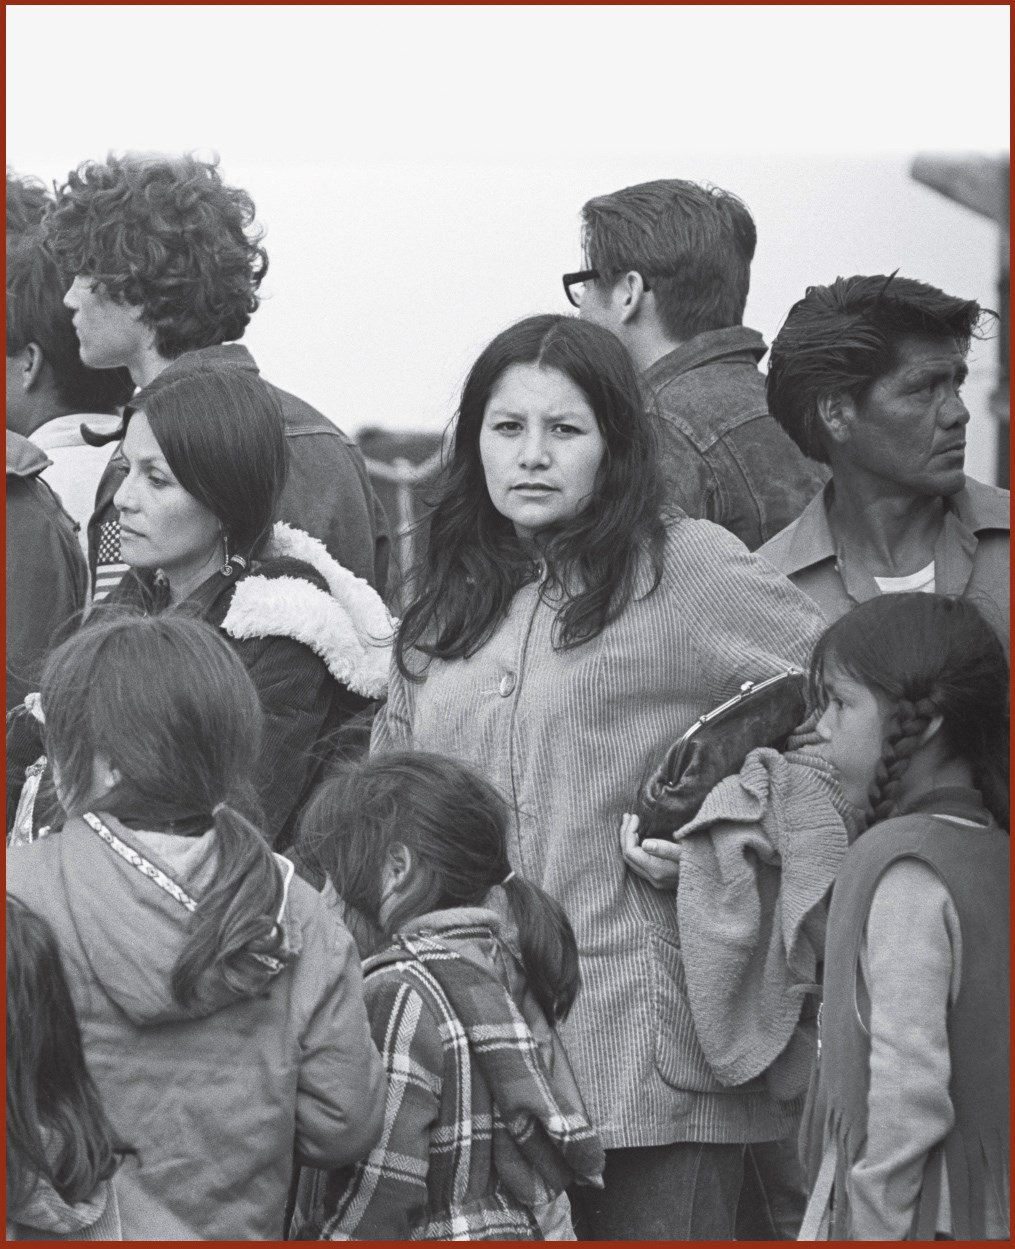 Woman and children among crowd going to Alcatraz, 1970